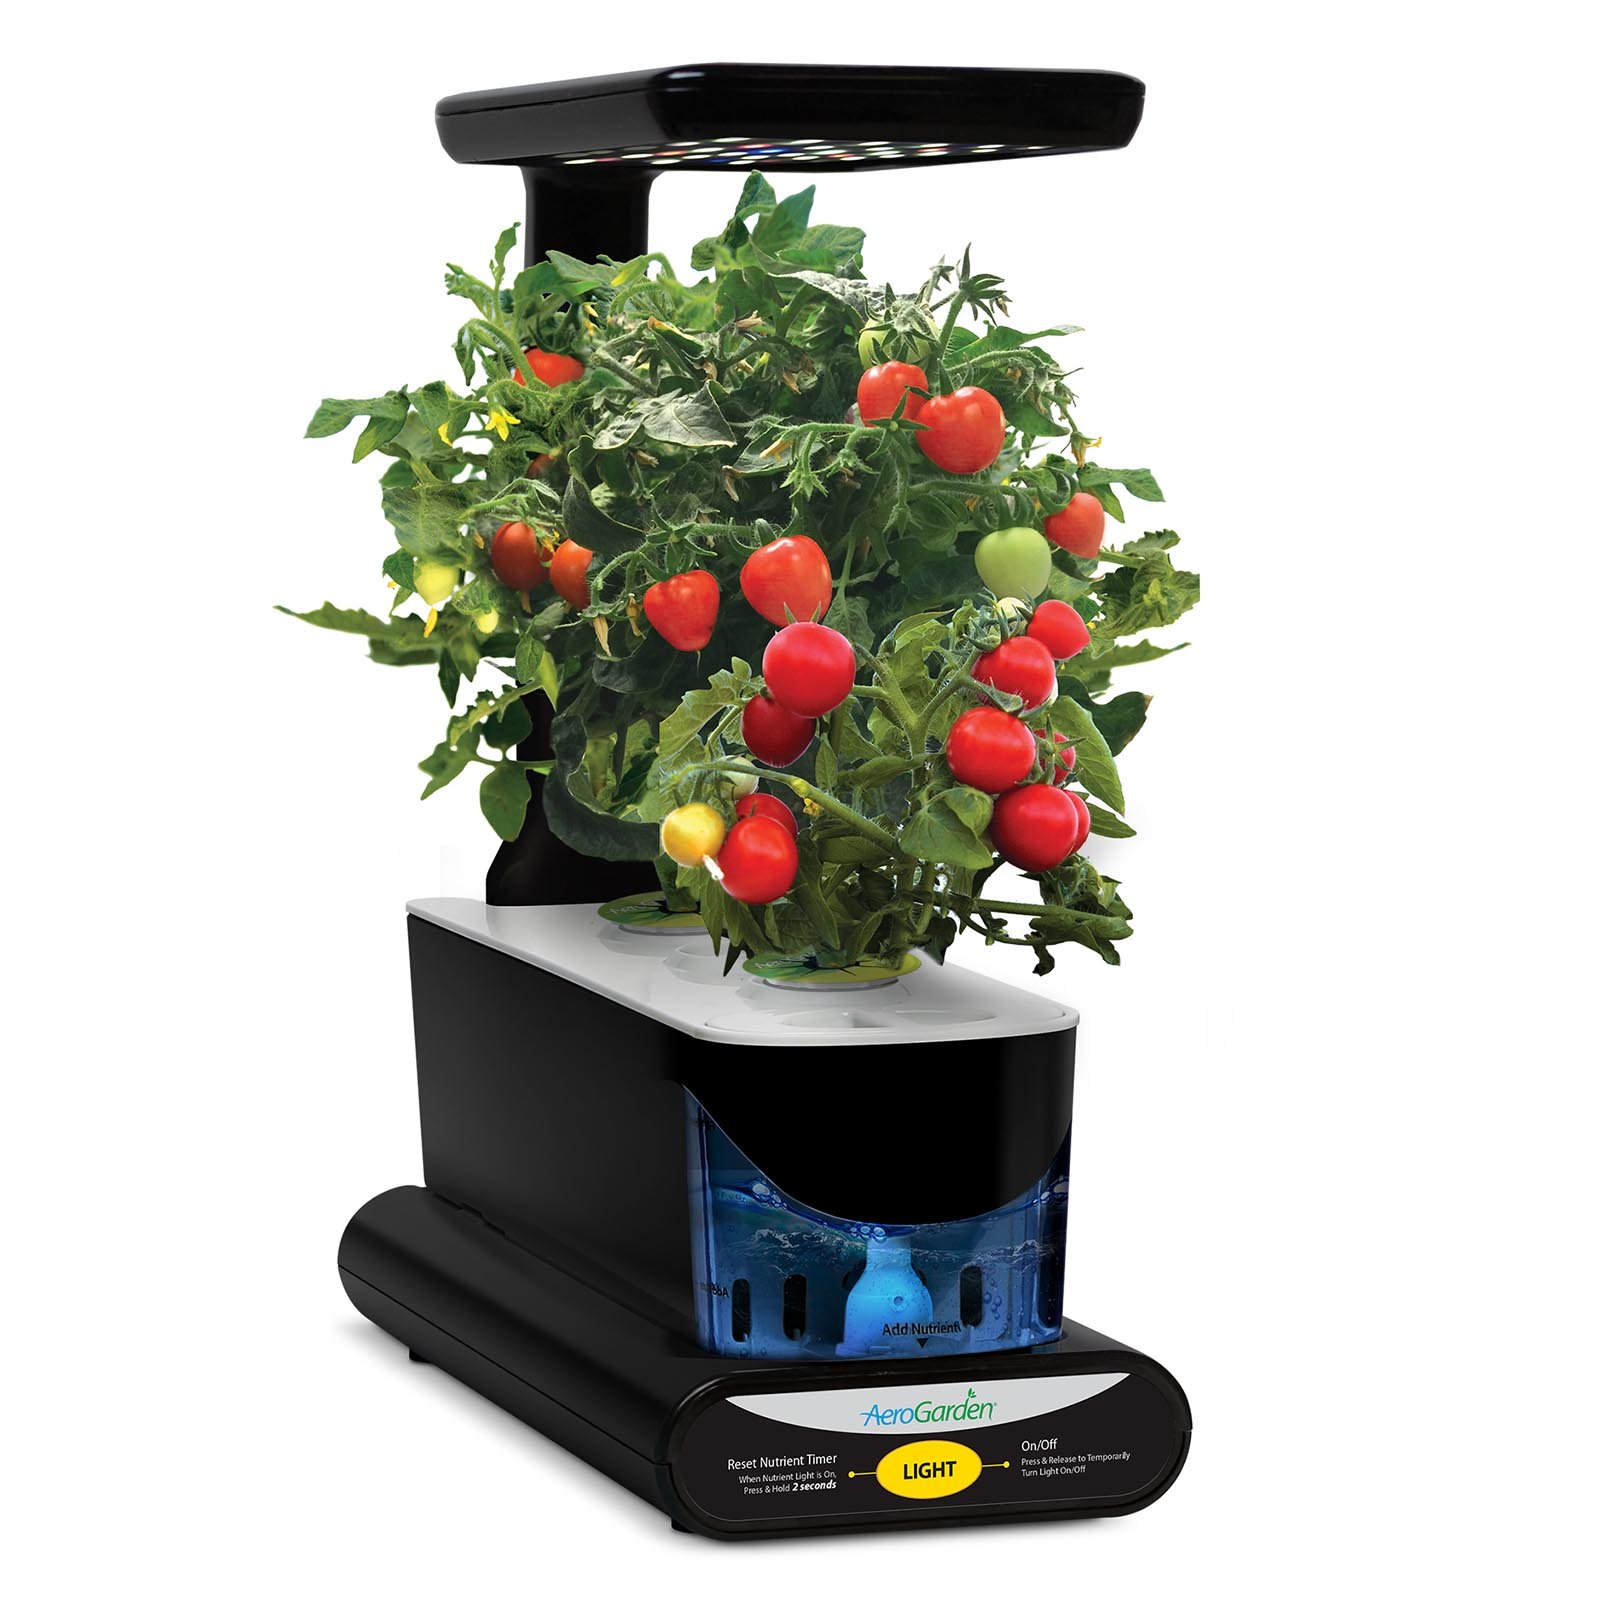 AeroGarden Sprout LED, Black with Herb Seed Kit - image 3 of 6